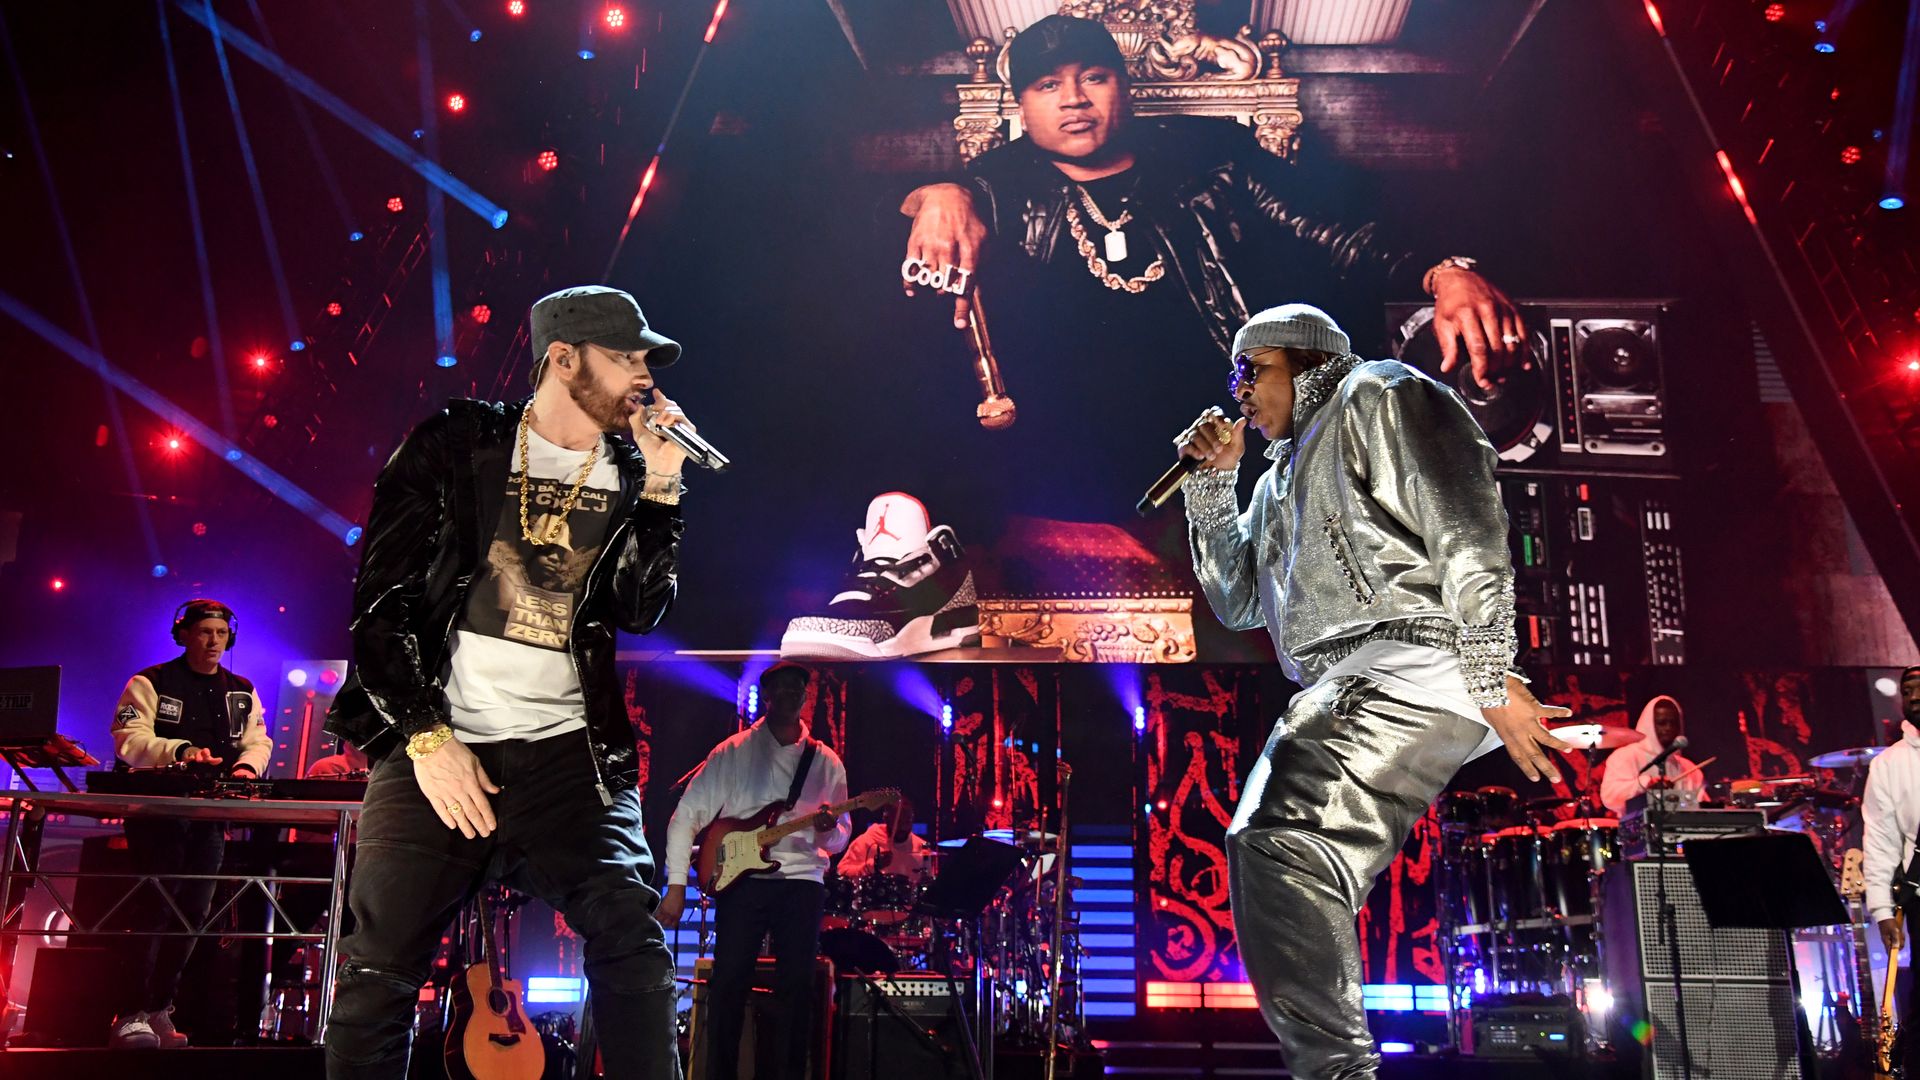 Eminem and LL Cool J perform on stage.